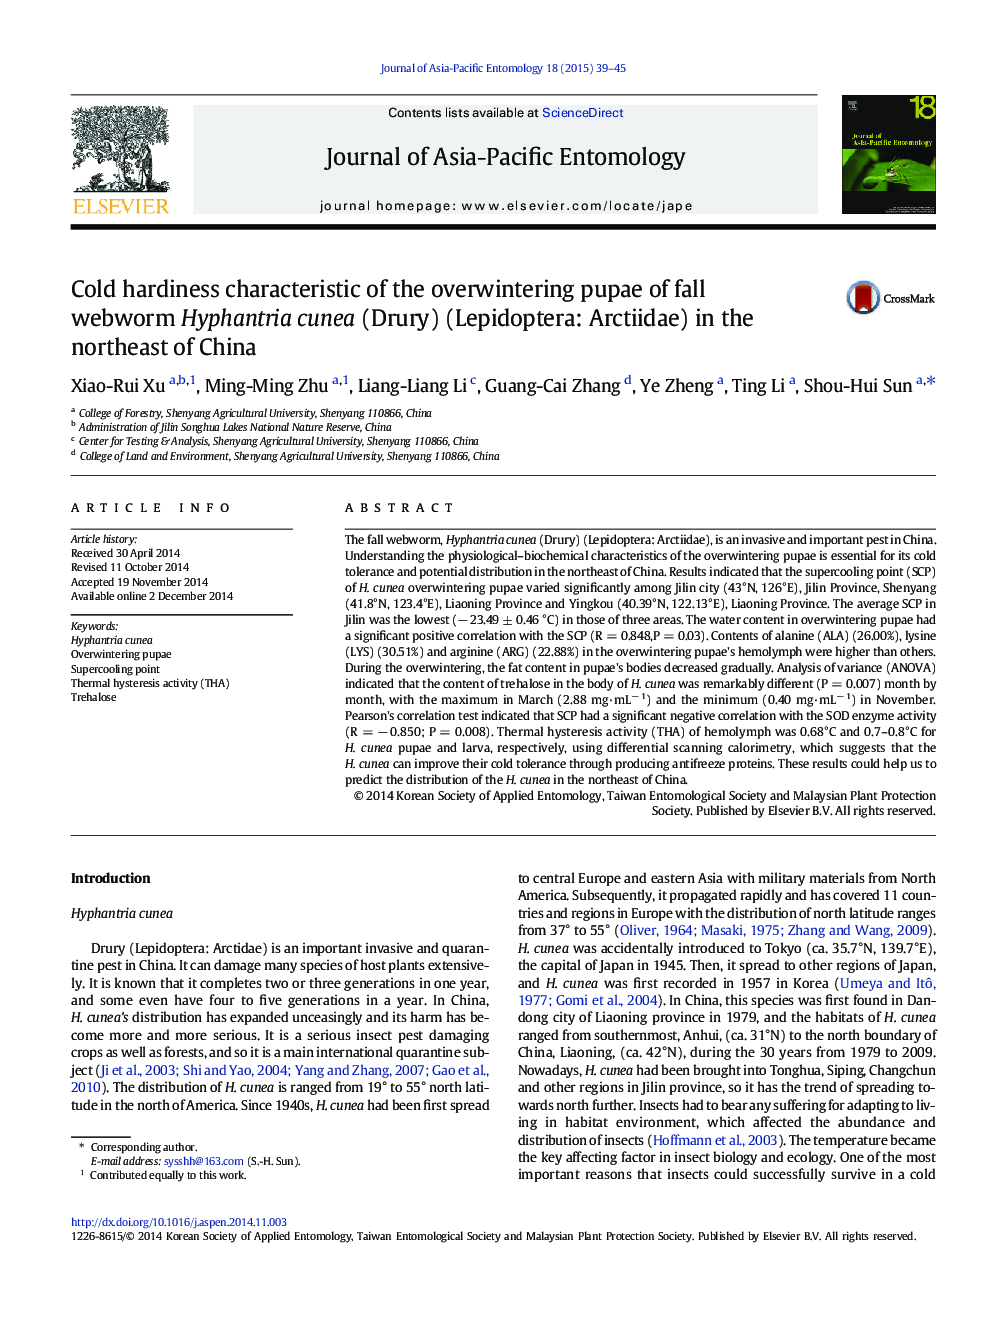 Cold hardiness characteristic of the overwintering pupae of fall webworm Hyphantria cunea (Drury) (Lepidoptera: Arctiidae) in the northeast of China